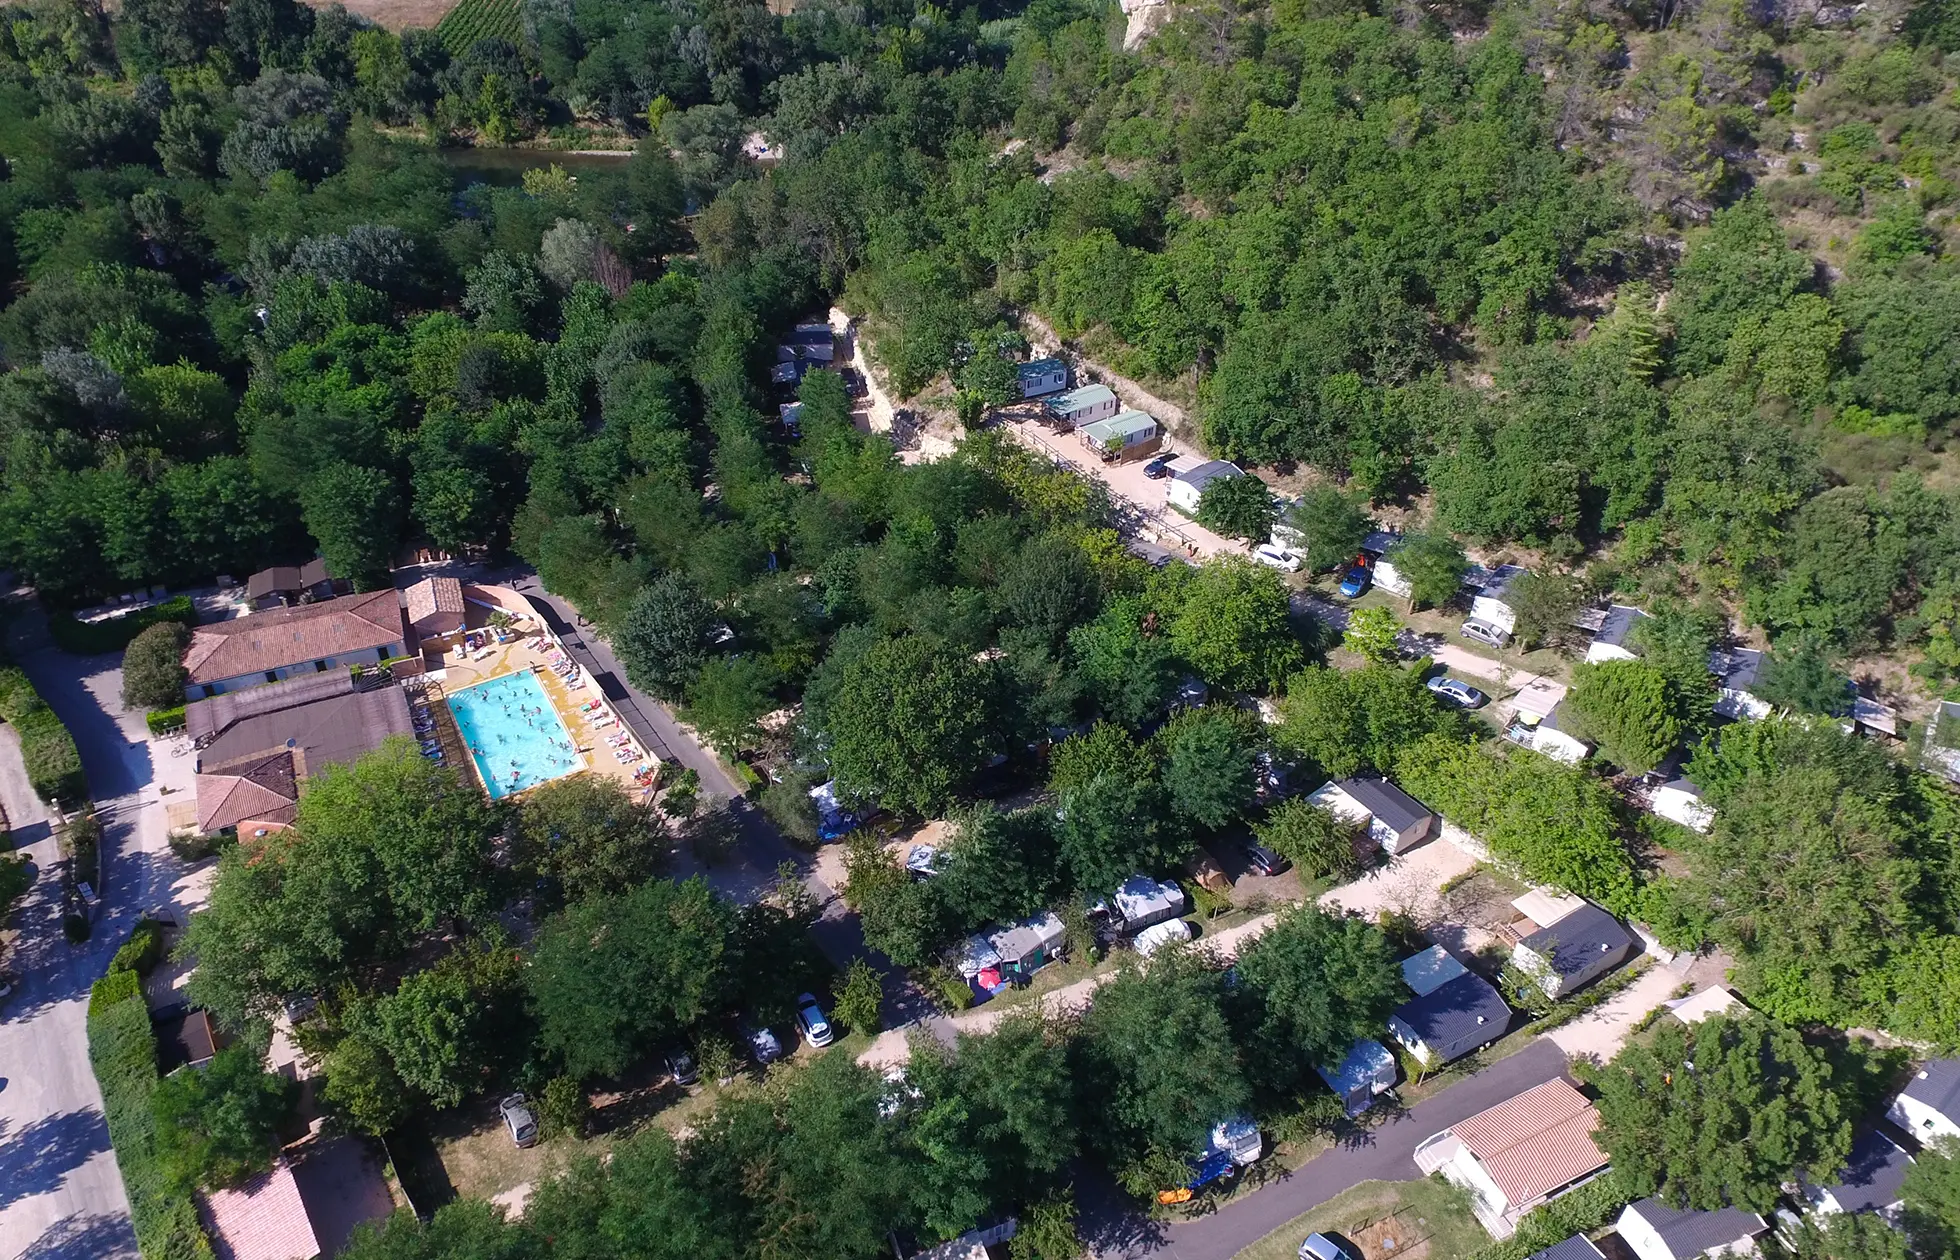 Angebot ' - '01 - Camping Le Saint Michelet - Situation